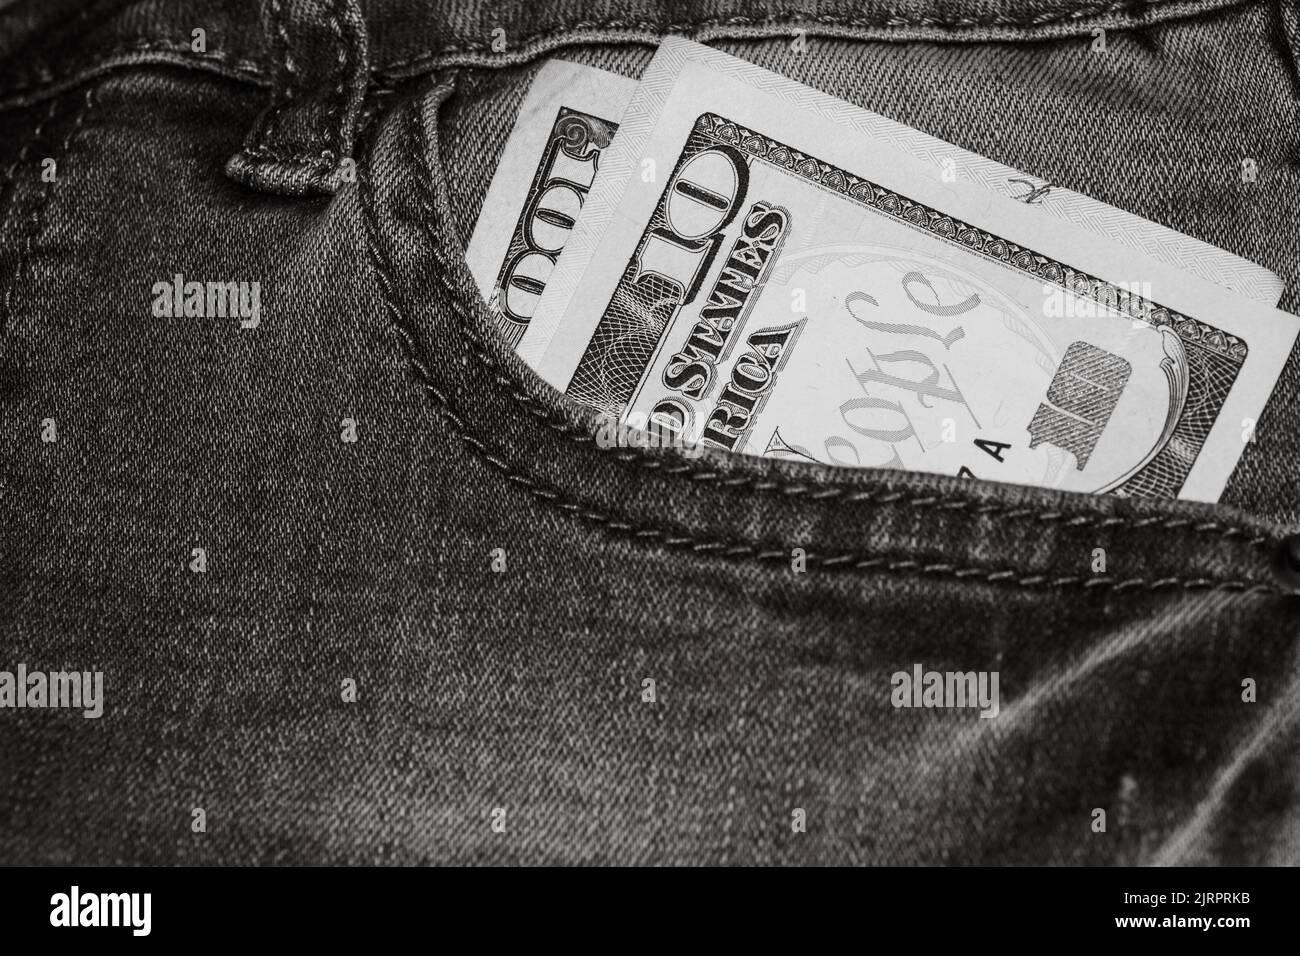 The United States Dollars sticking out of the jeans pocket Stock Photo ...